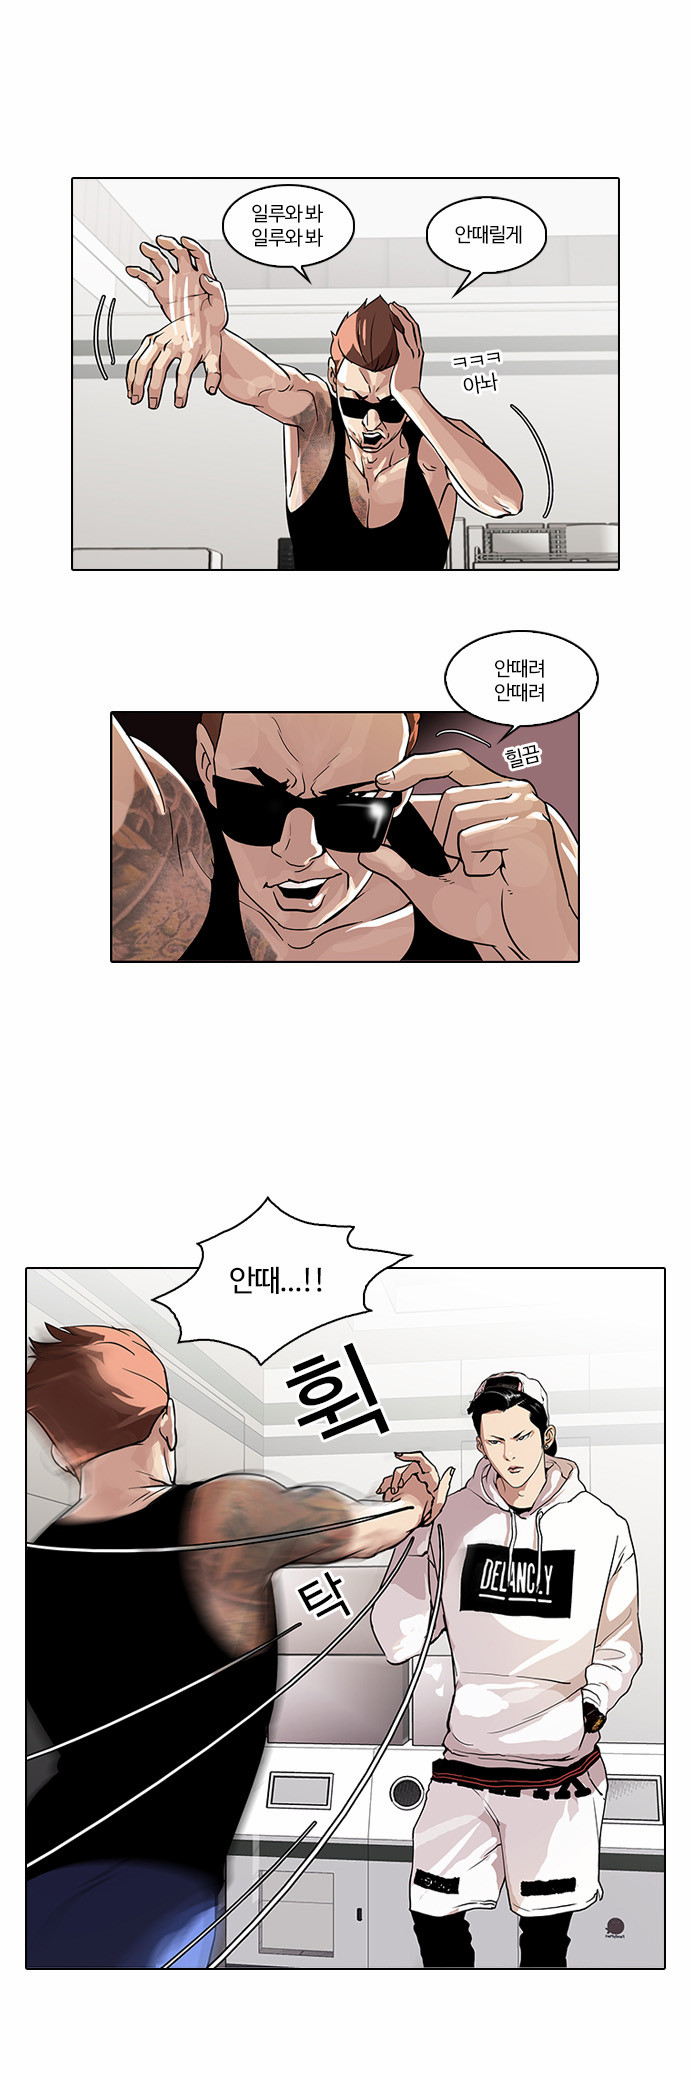 Lookism - Chapter 31 - Page 2